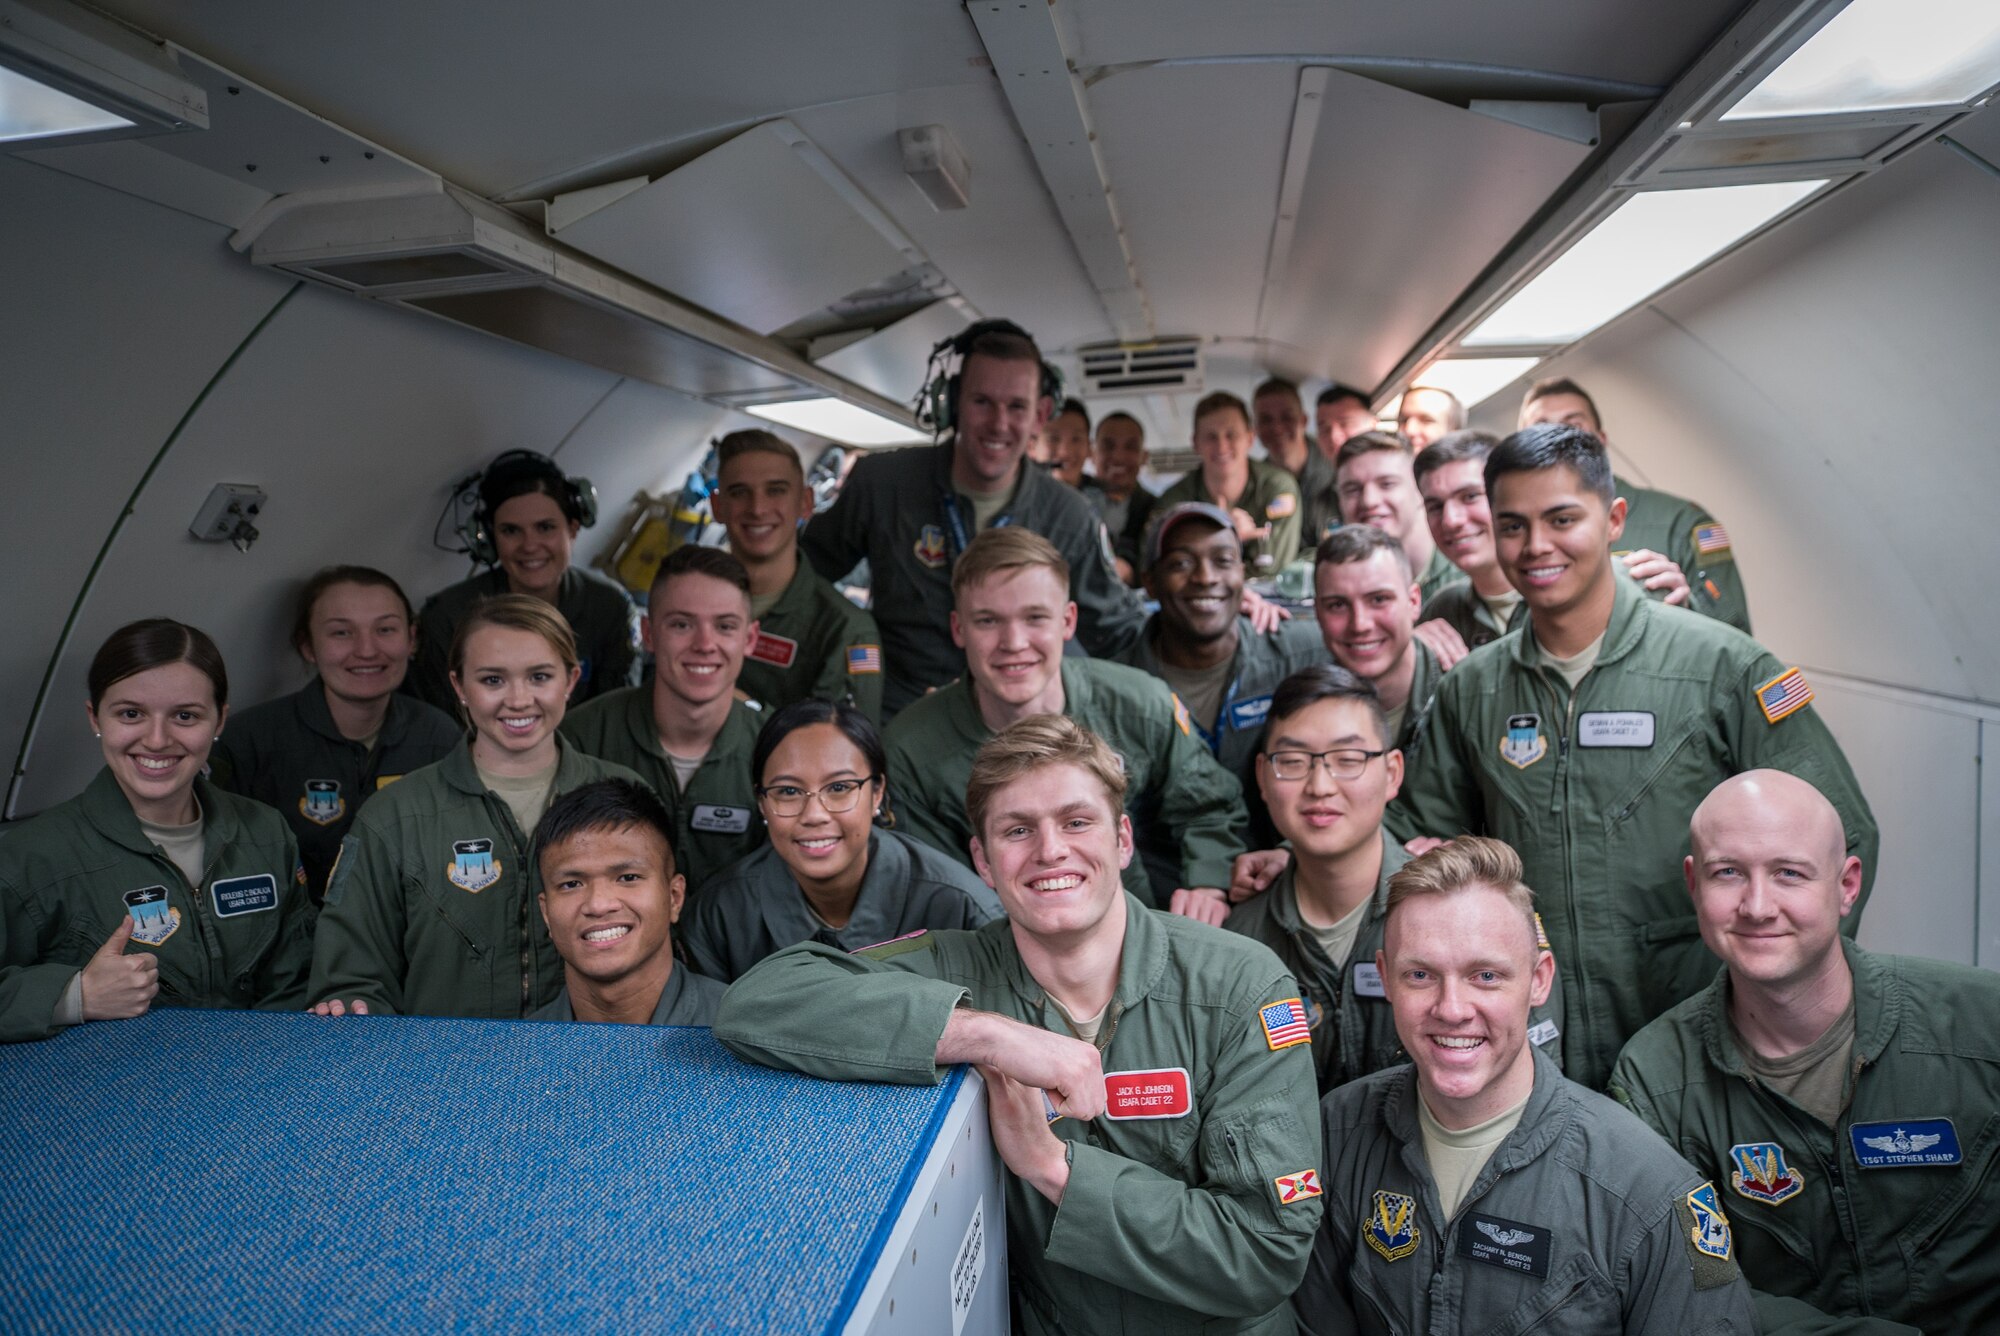 Air Force cadets pose for a photo onboard an Air Force aircraft